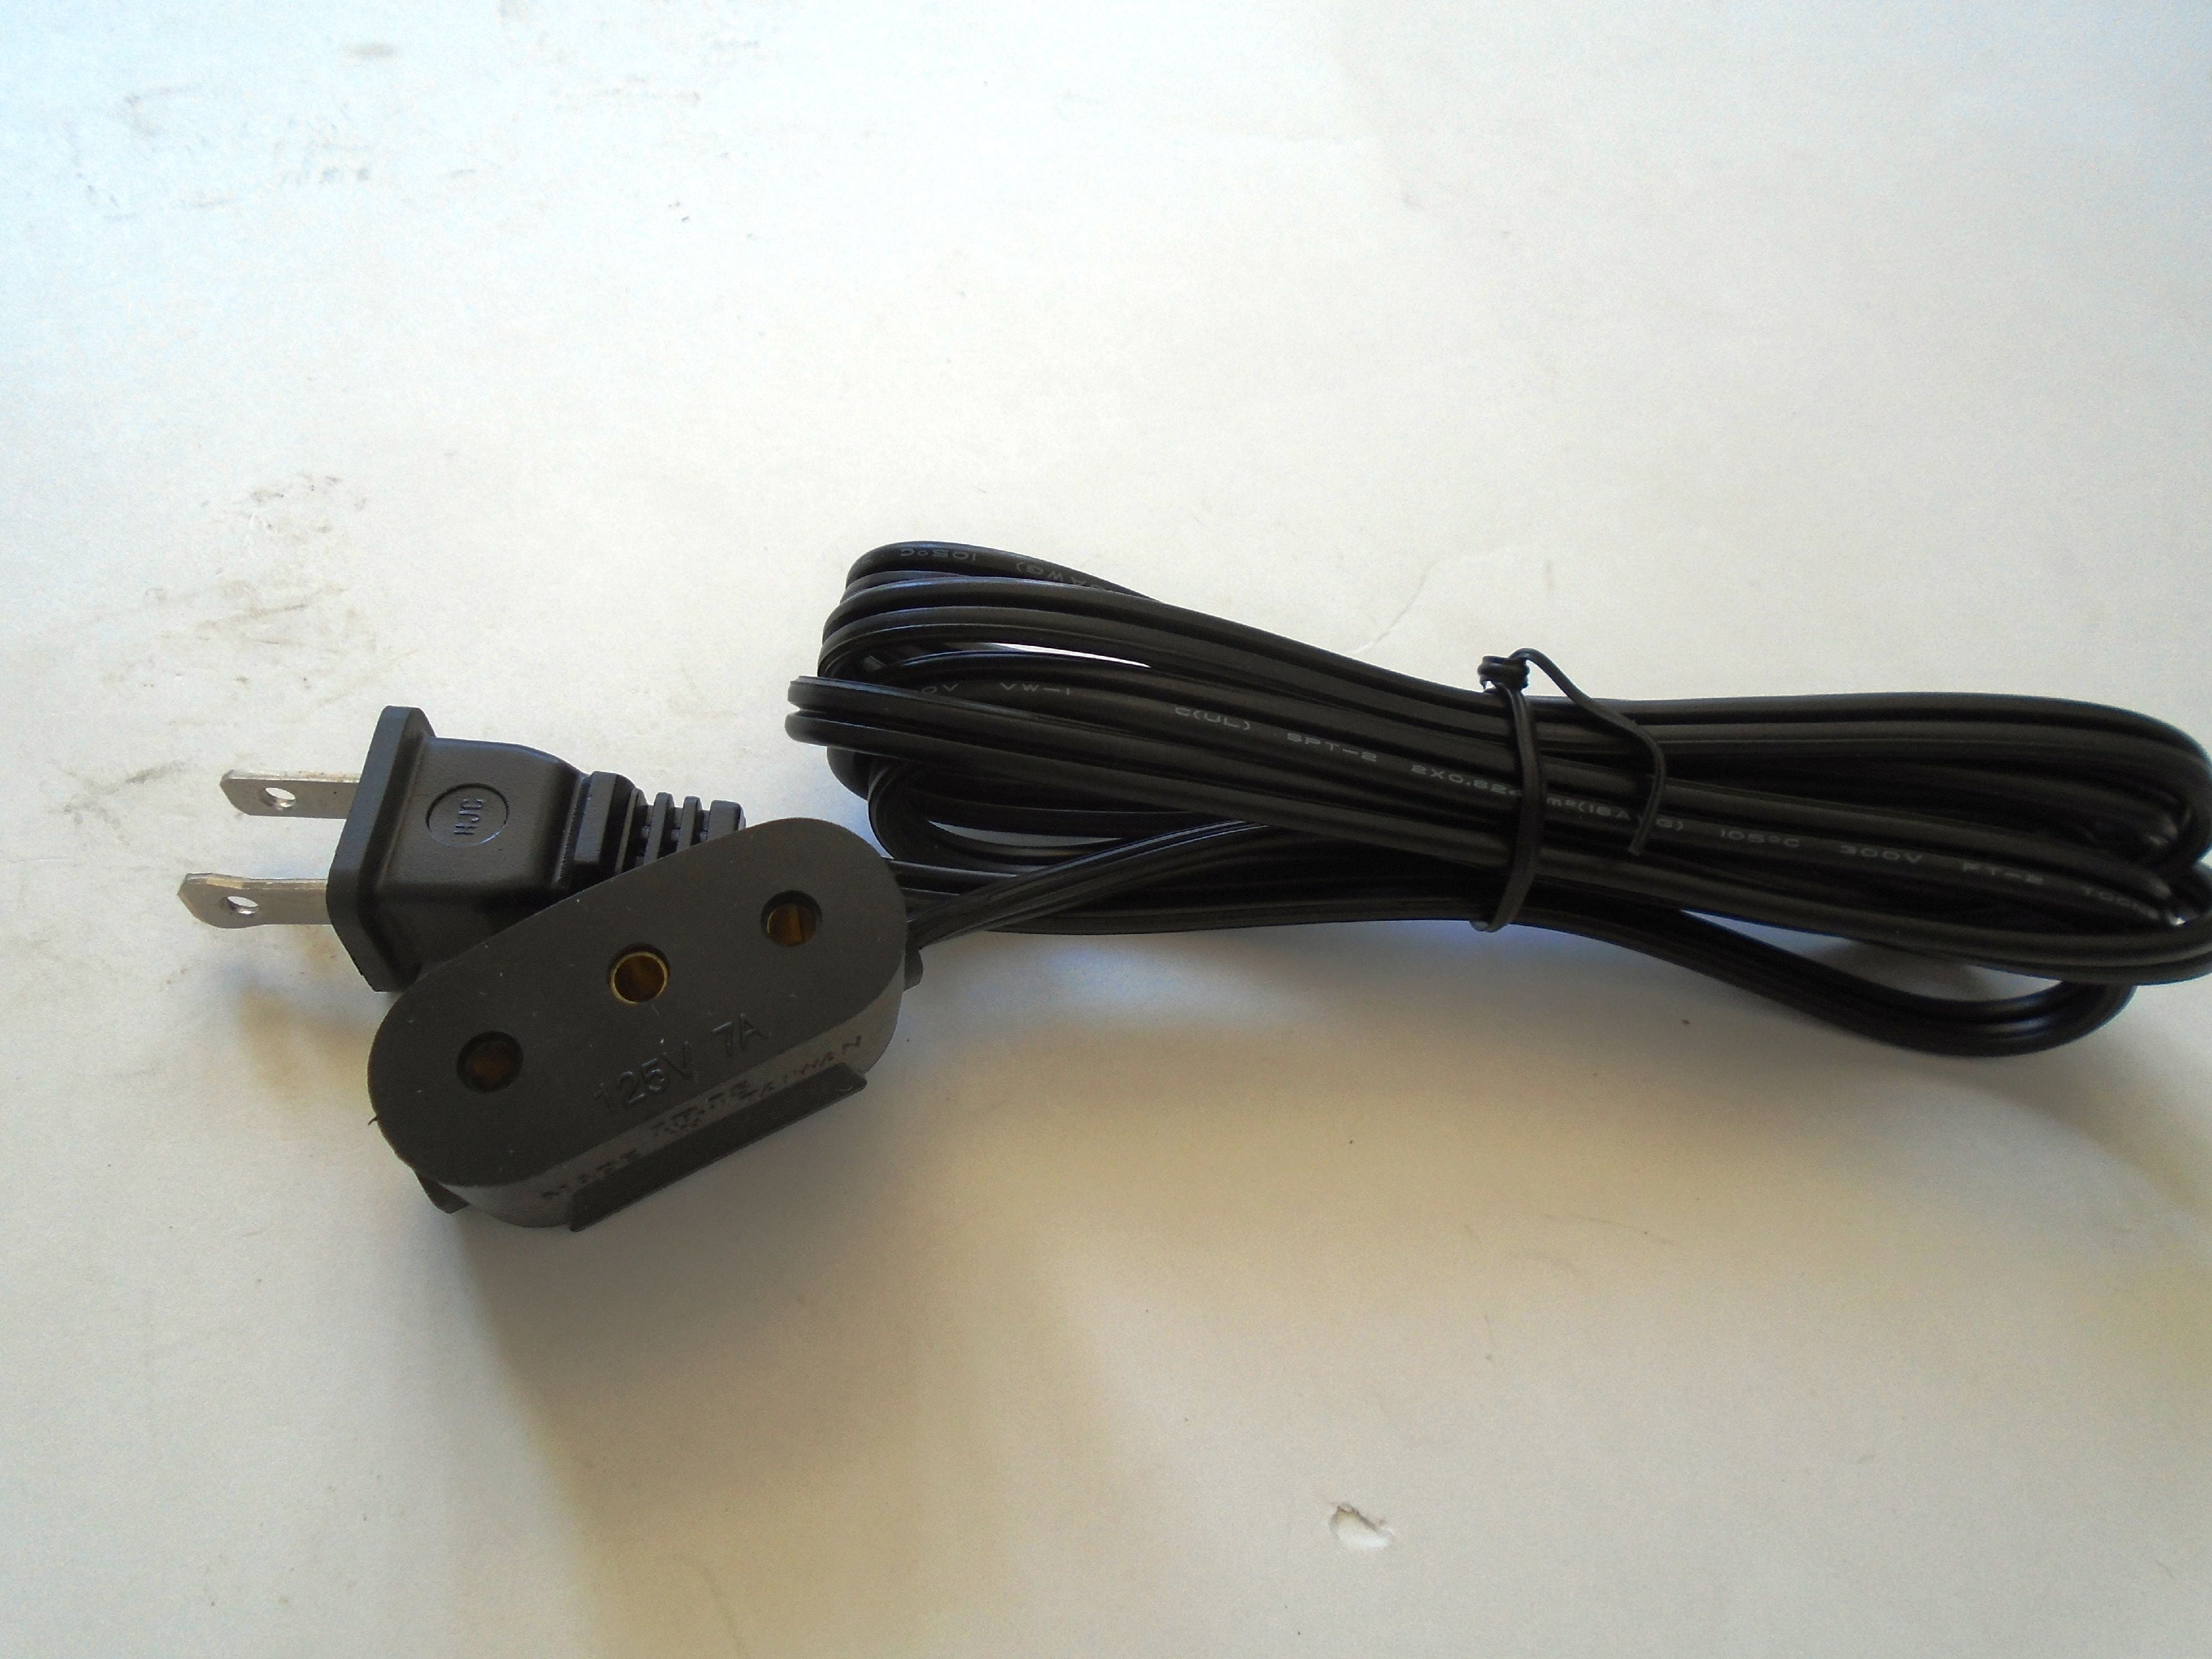 Motor Lead Power Cord For Singer 15-30, 15-91, 221, 301, 401A, 501